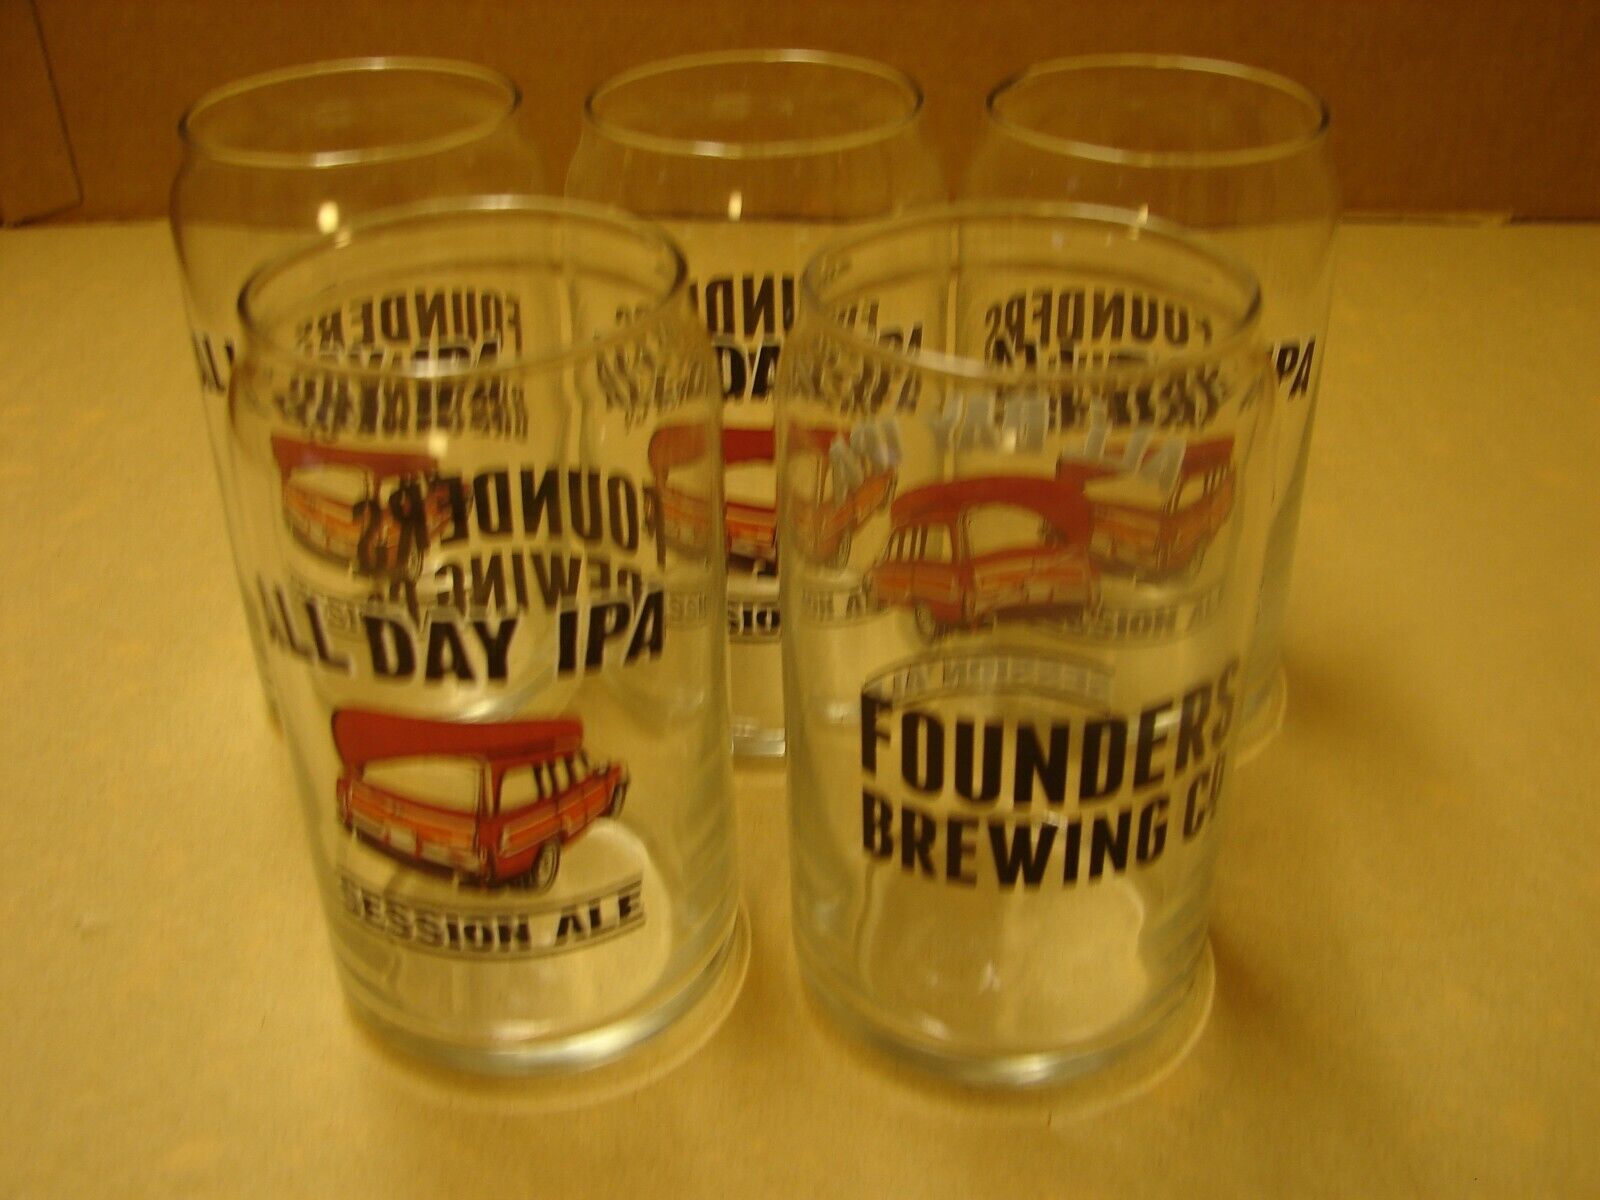 5 FOUNDERS Brewing Co Can Shaped Beer Pint Glasses - All Day IPA Session Ale